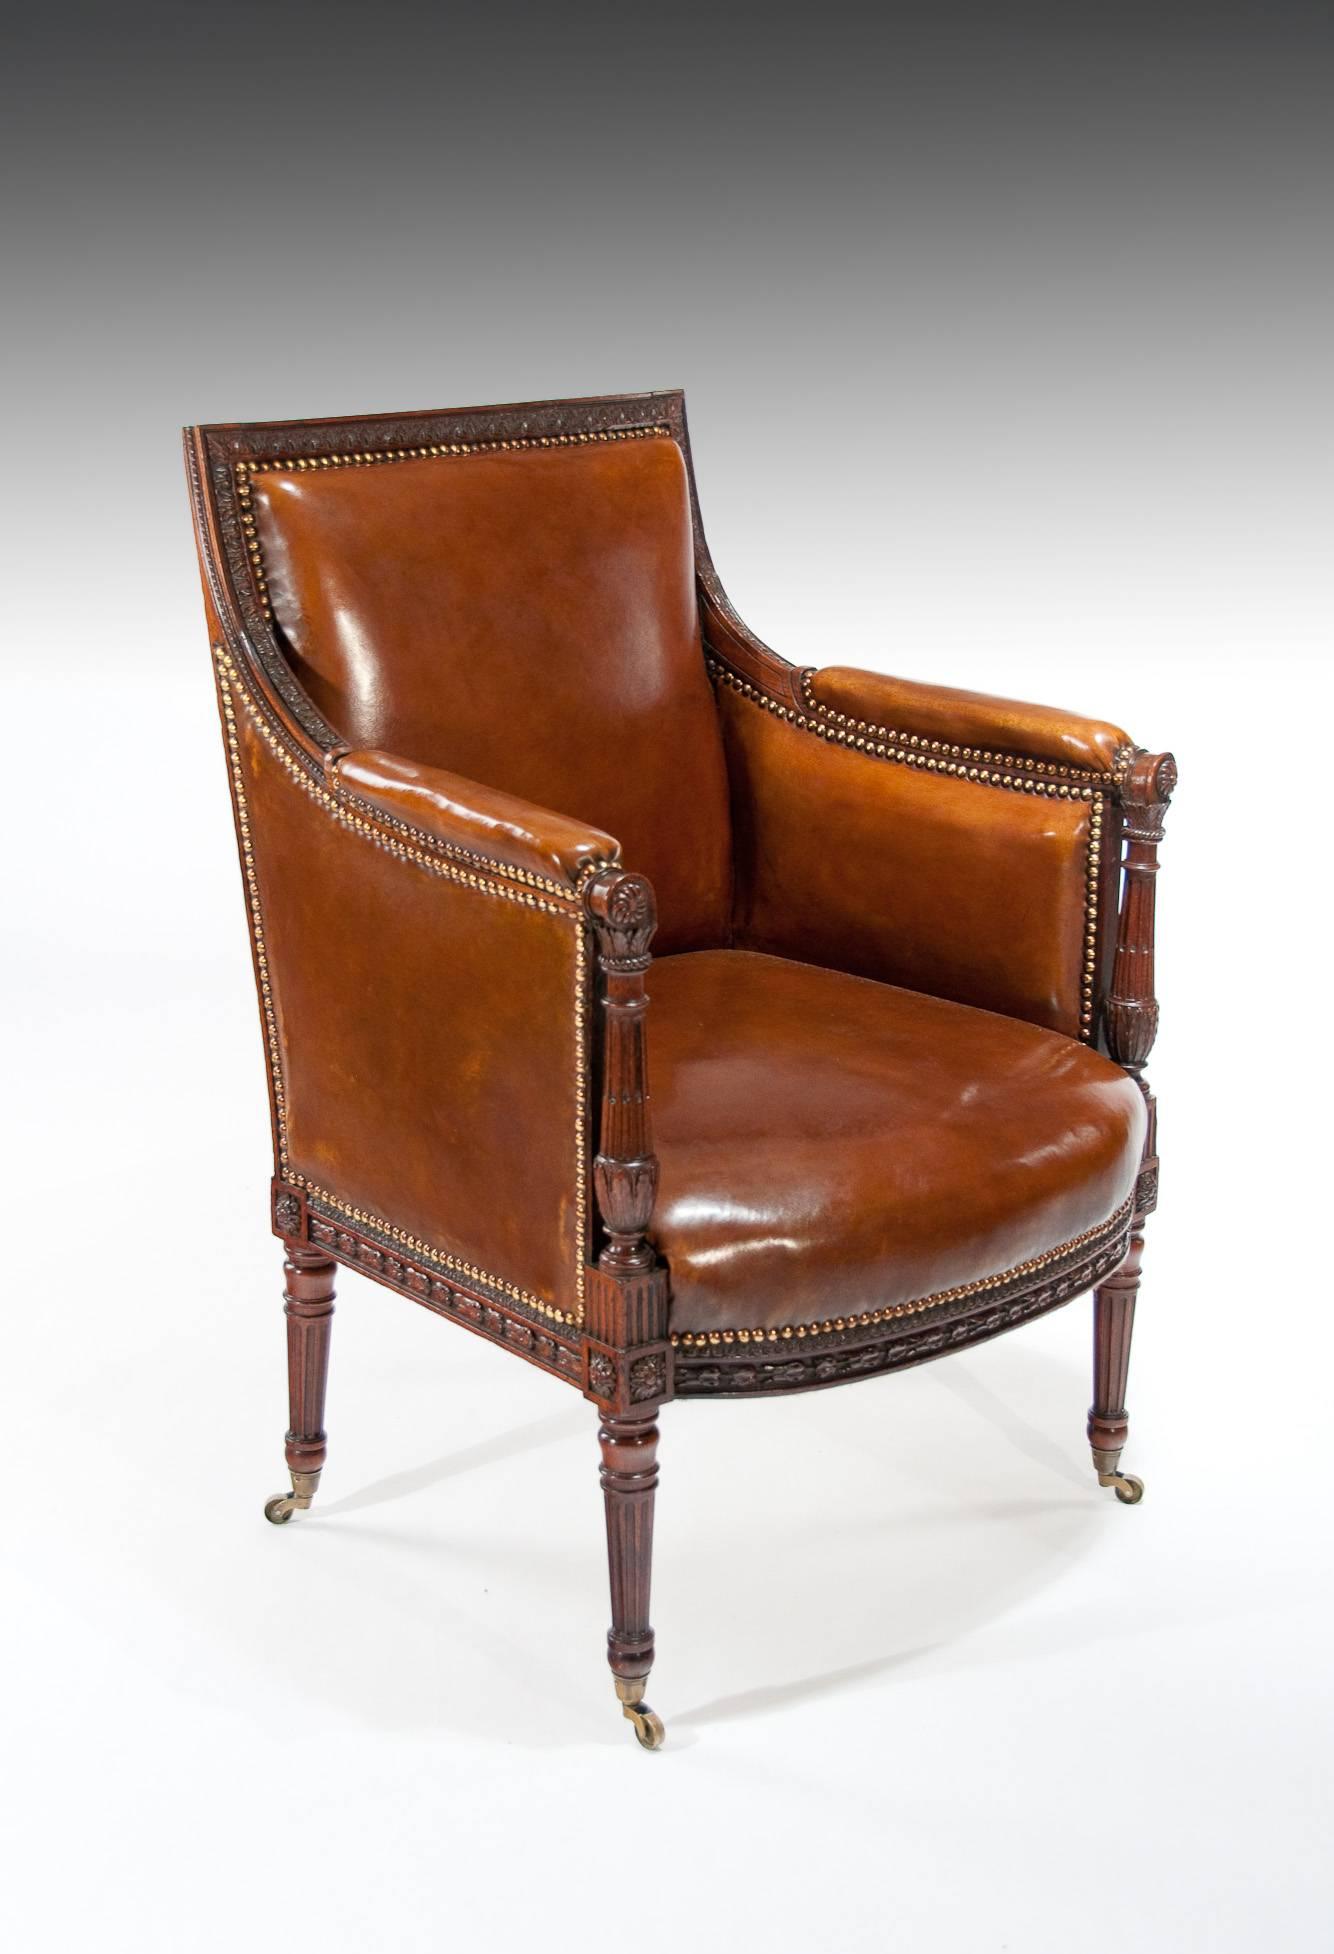 A finely carved antique mahogany and leather upholstered armchair dating to the late 19th century, circa 1880-1900. 

Having a square carved mahogany framed back with padded leather upholstery the arms swept down to a cushioned armrest supported